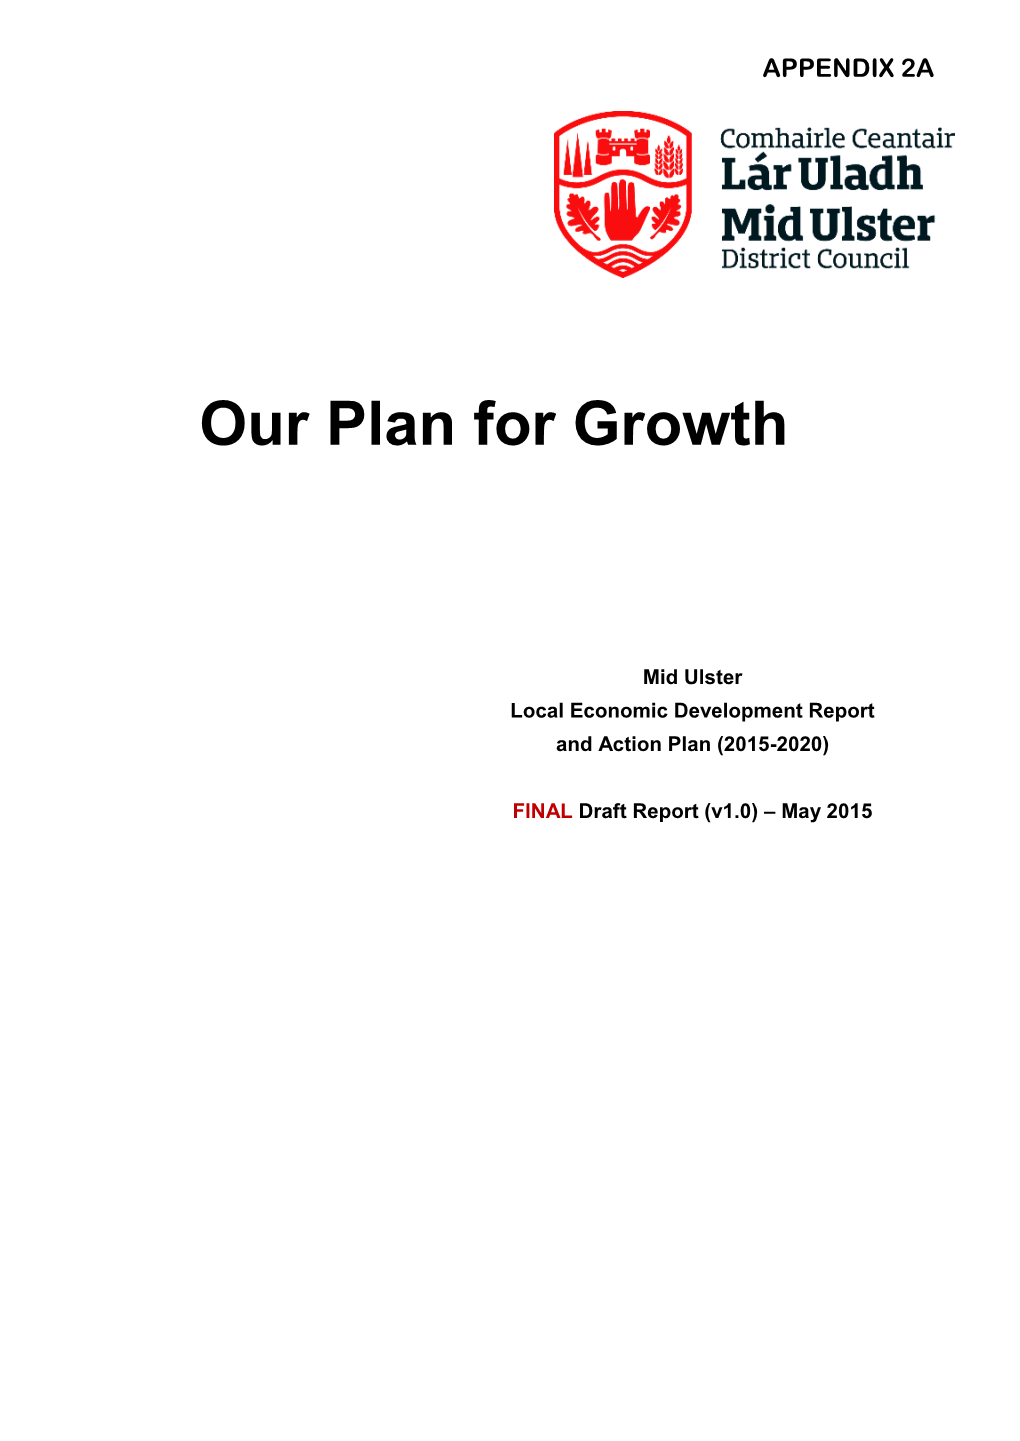 Our Plan for Growth